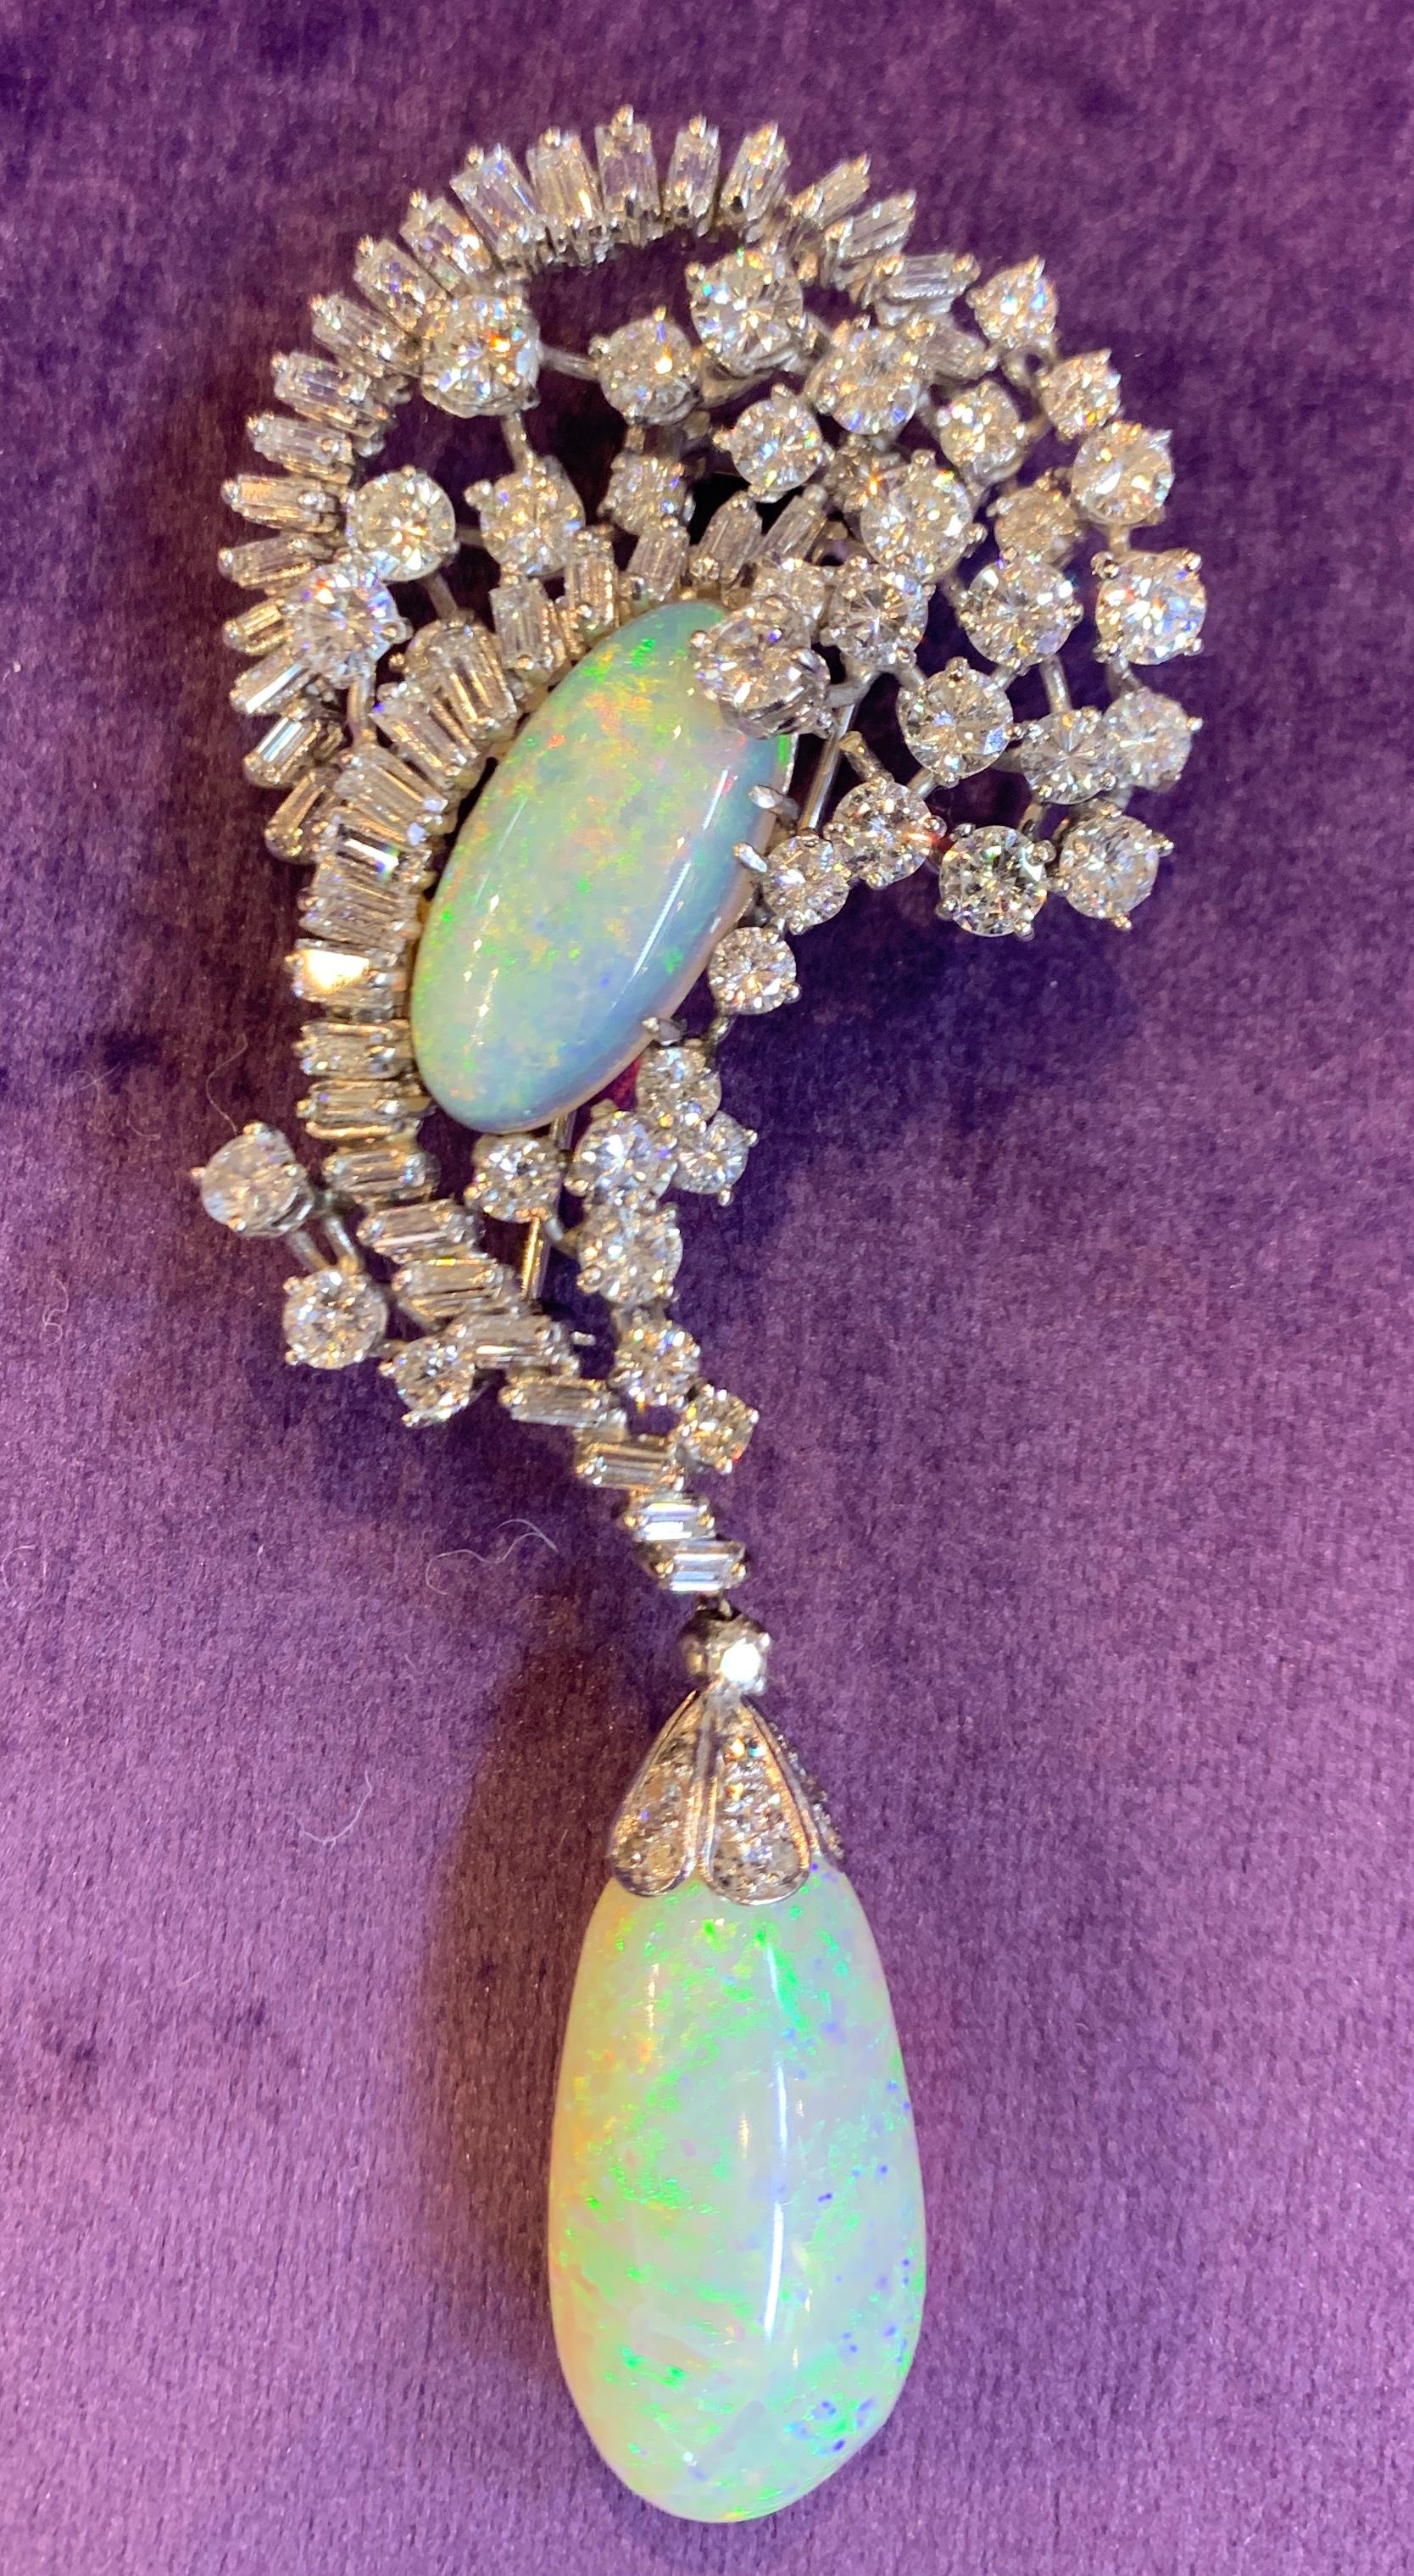 Opal & Diamond Drop Brooch set in Platinum
Approx Opal drop Weight: 26.32 Cts 
Approx Oval Opal: 6.00 Cts
Approx Diamond Weight: 8.59 Cts
Measurements: 3.5 inches in length
